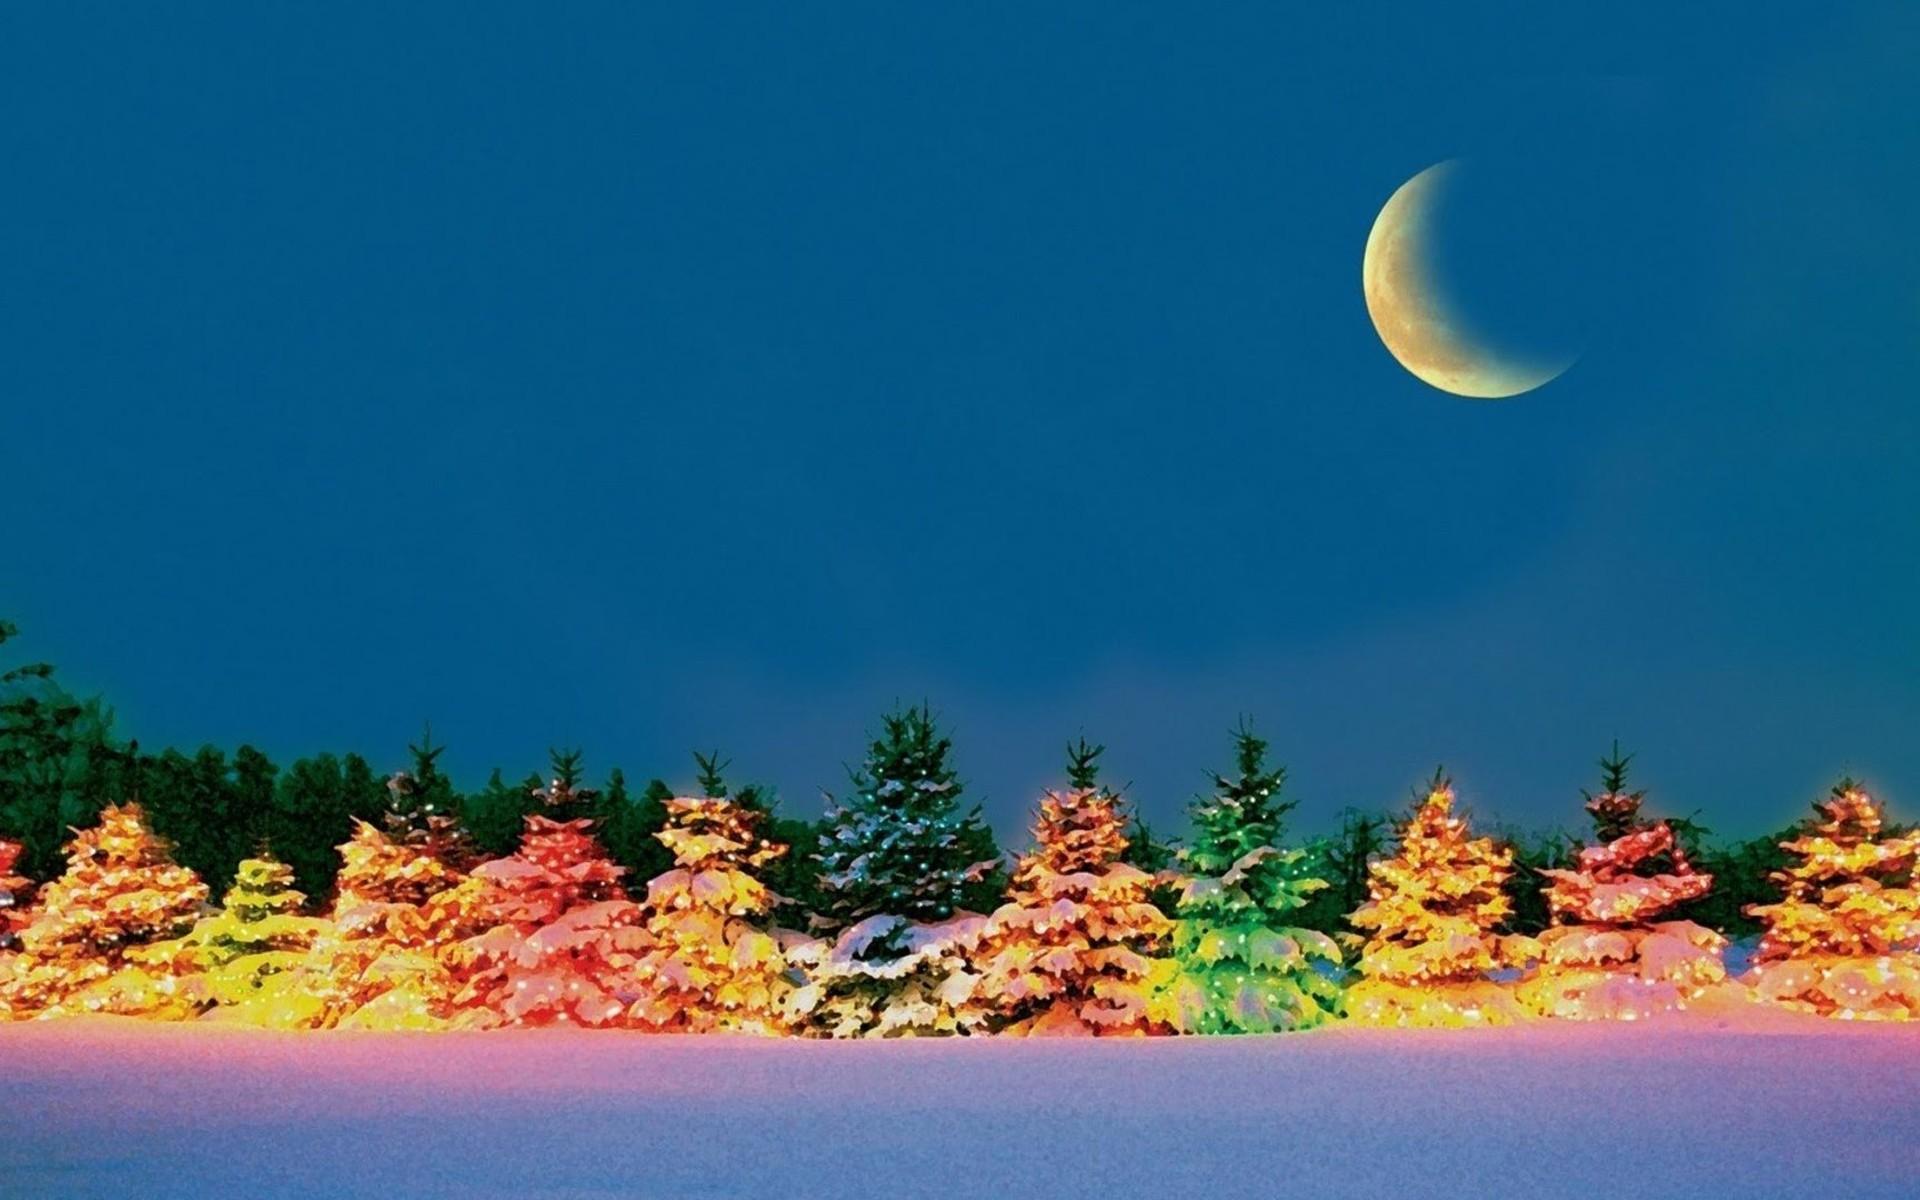 Colorful tree in the cold winter night